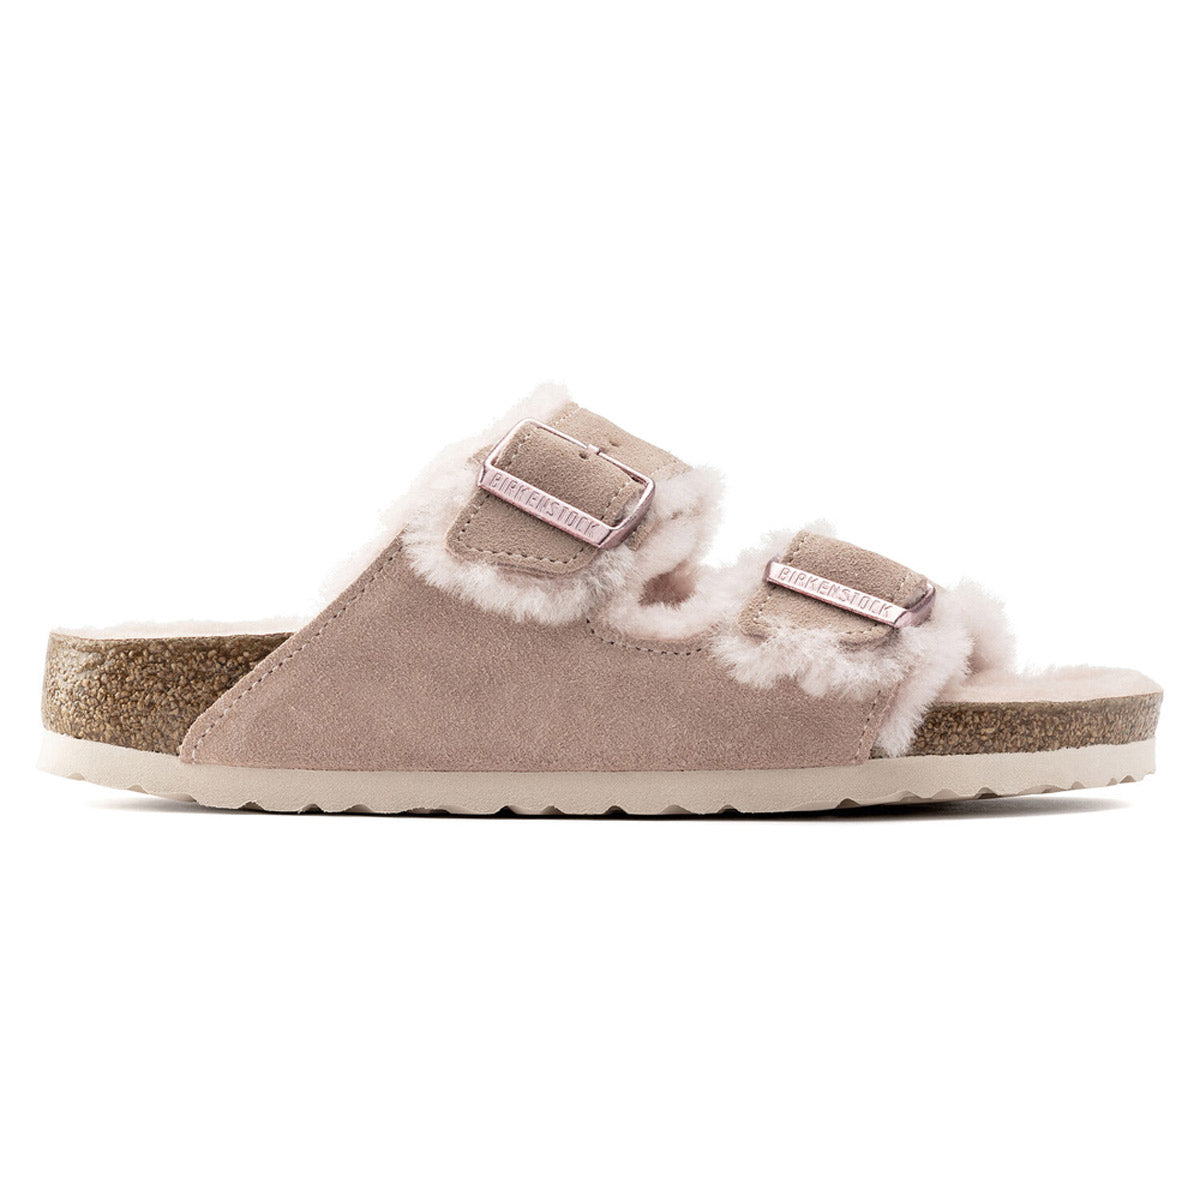 Genuine suede Birkenstock Arizona Shearling slipper with a cork-latex footbed, featuring fuzzy, strap-adjustable BIRKENSTOCK ARIZONA SHEARLING LIGHT ROSE - WOMENS upper on a white background.